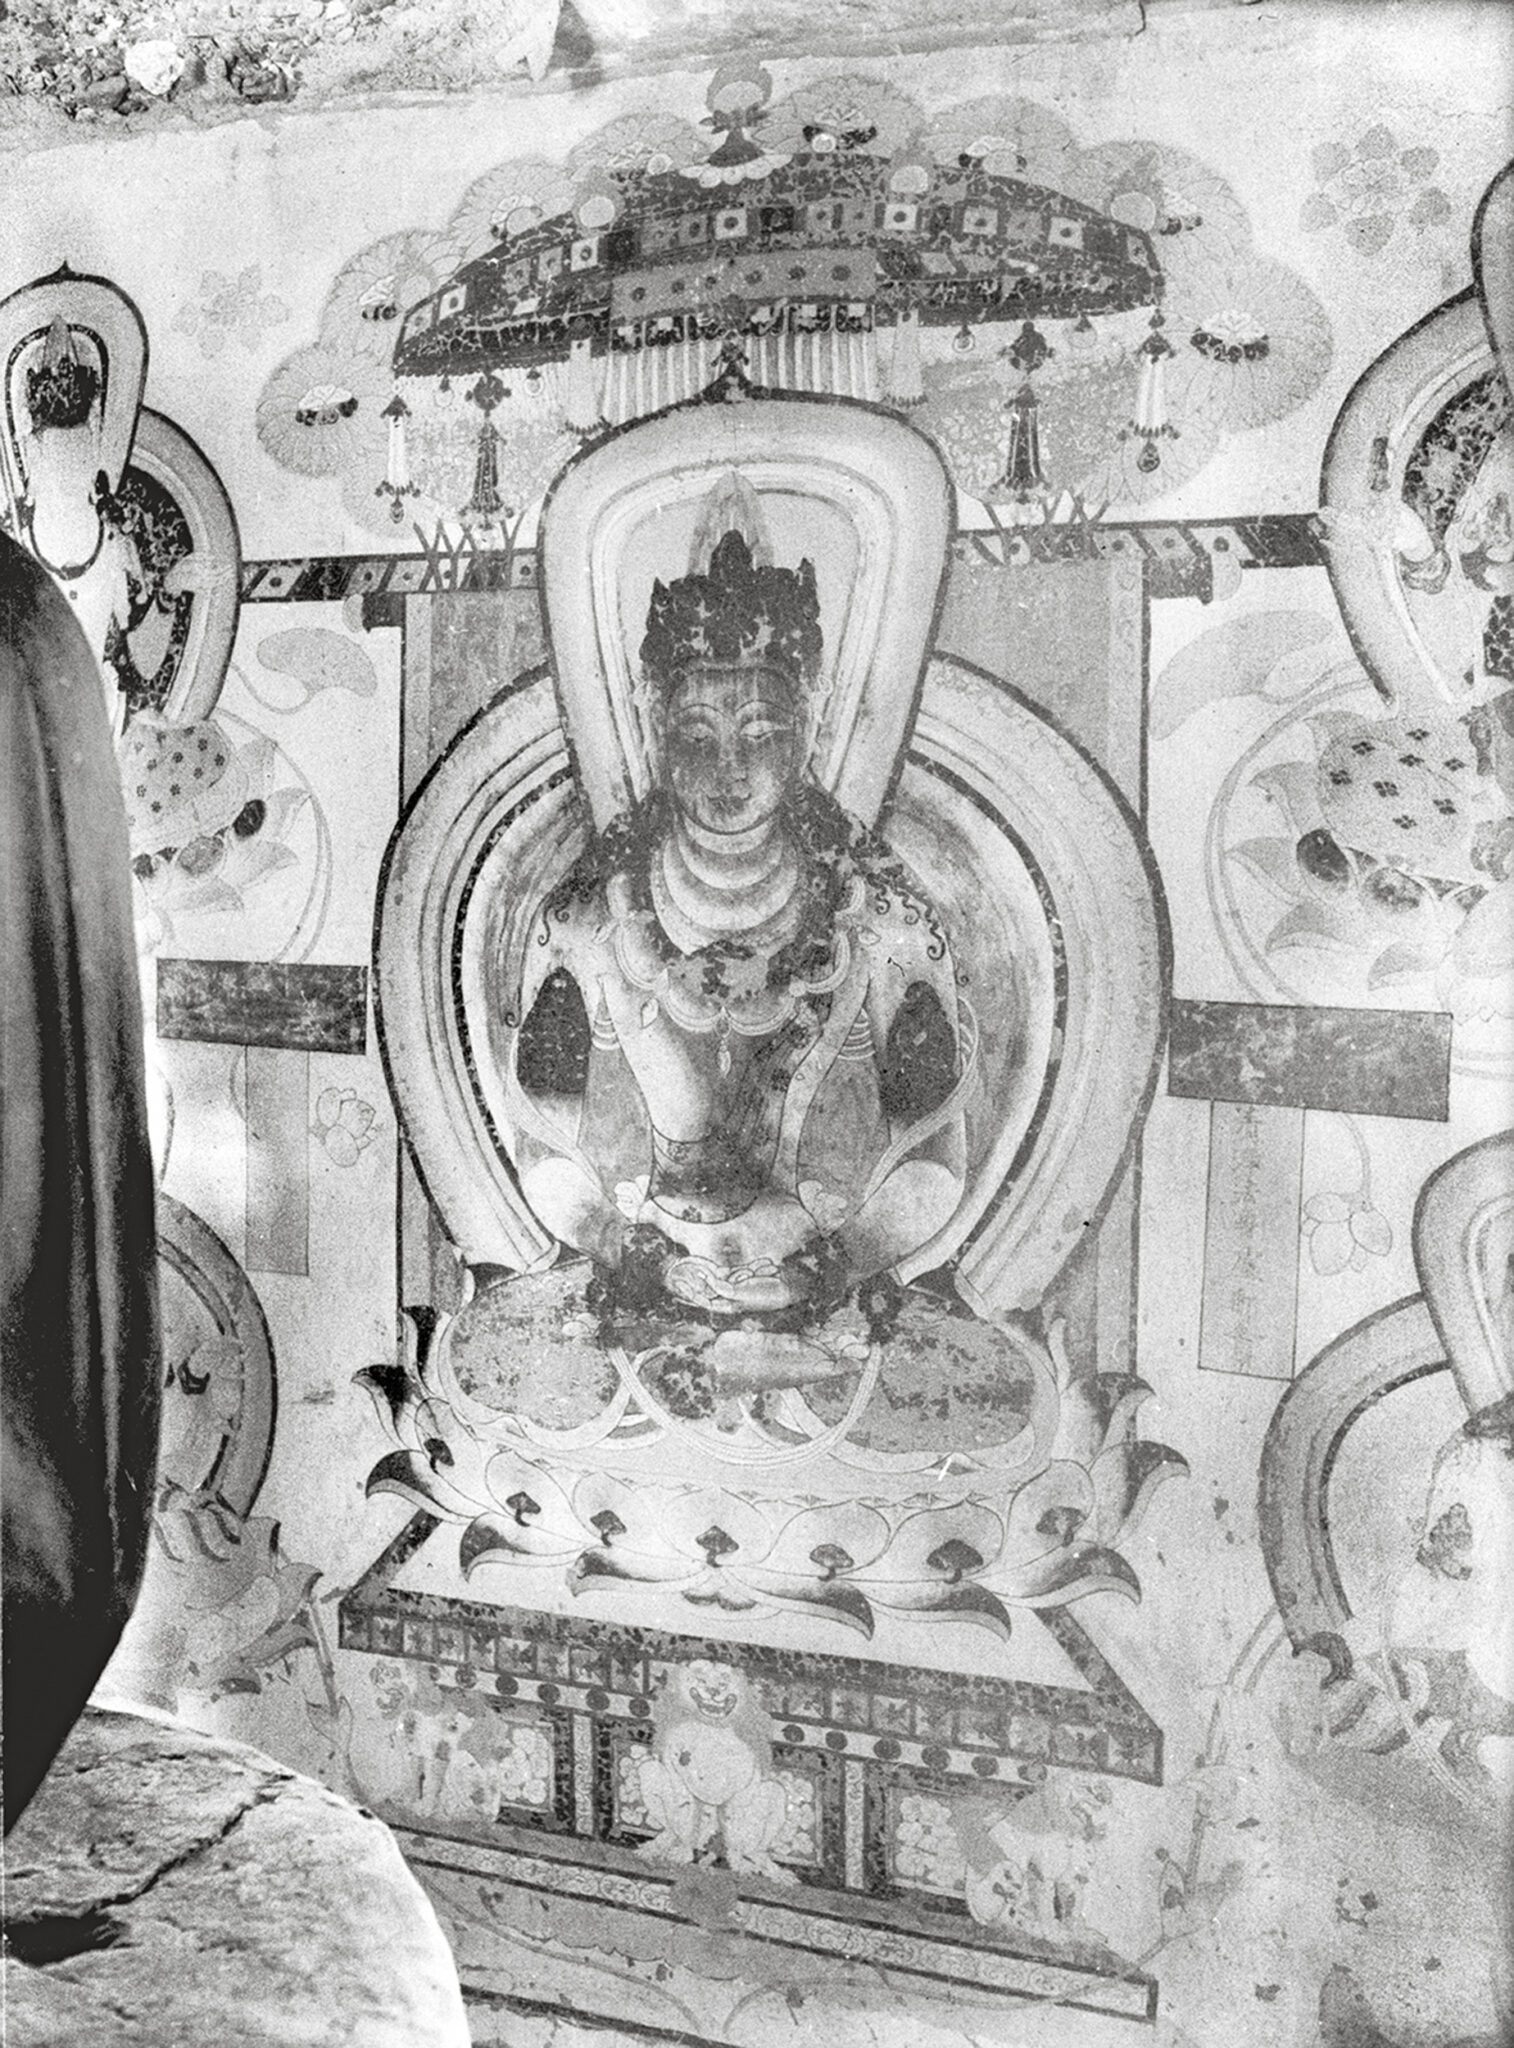 Black and white image of wall painting depicting haloed deity seated on lotus pedestal